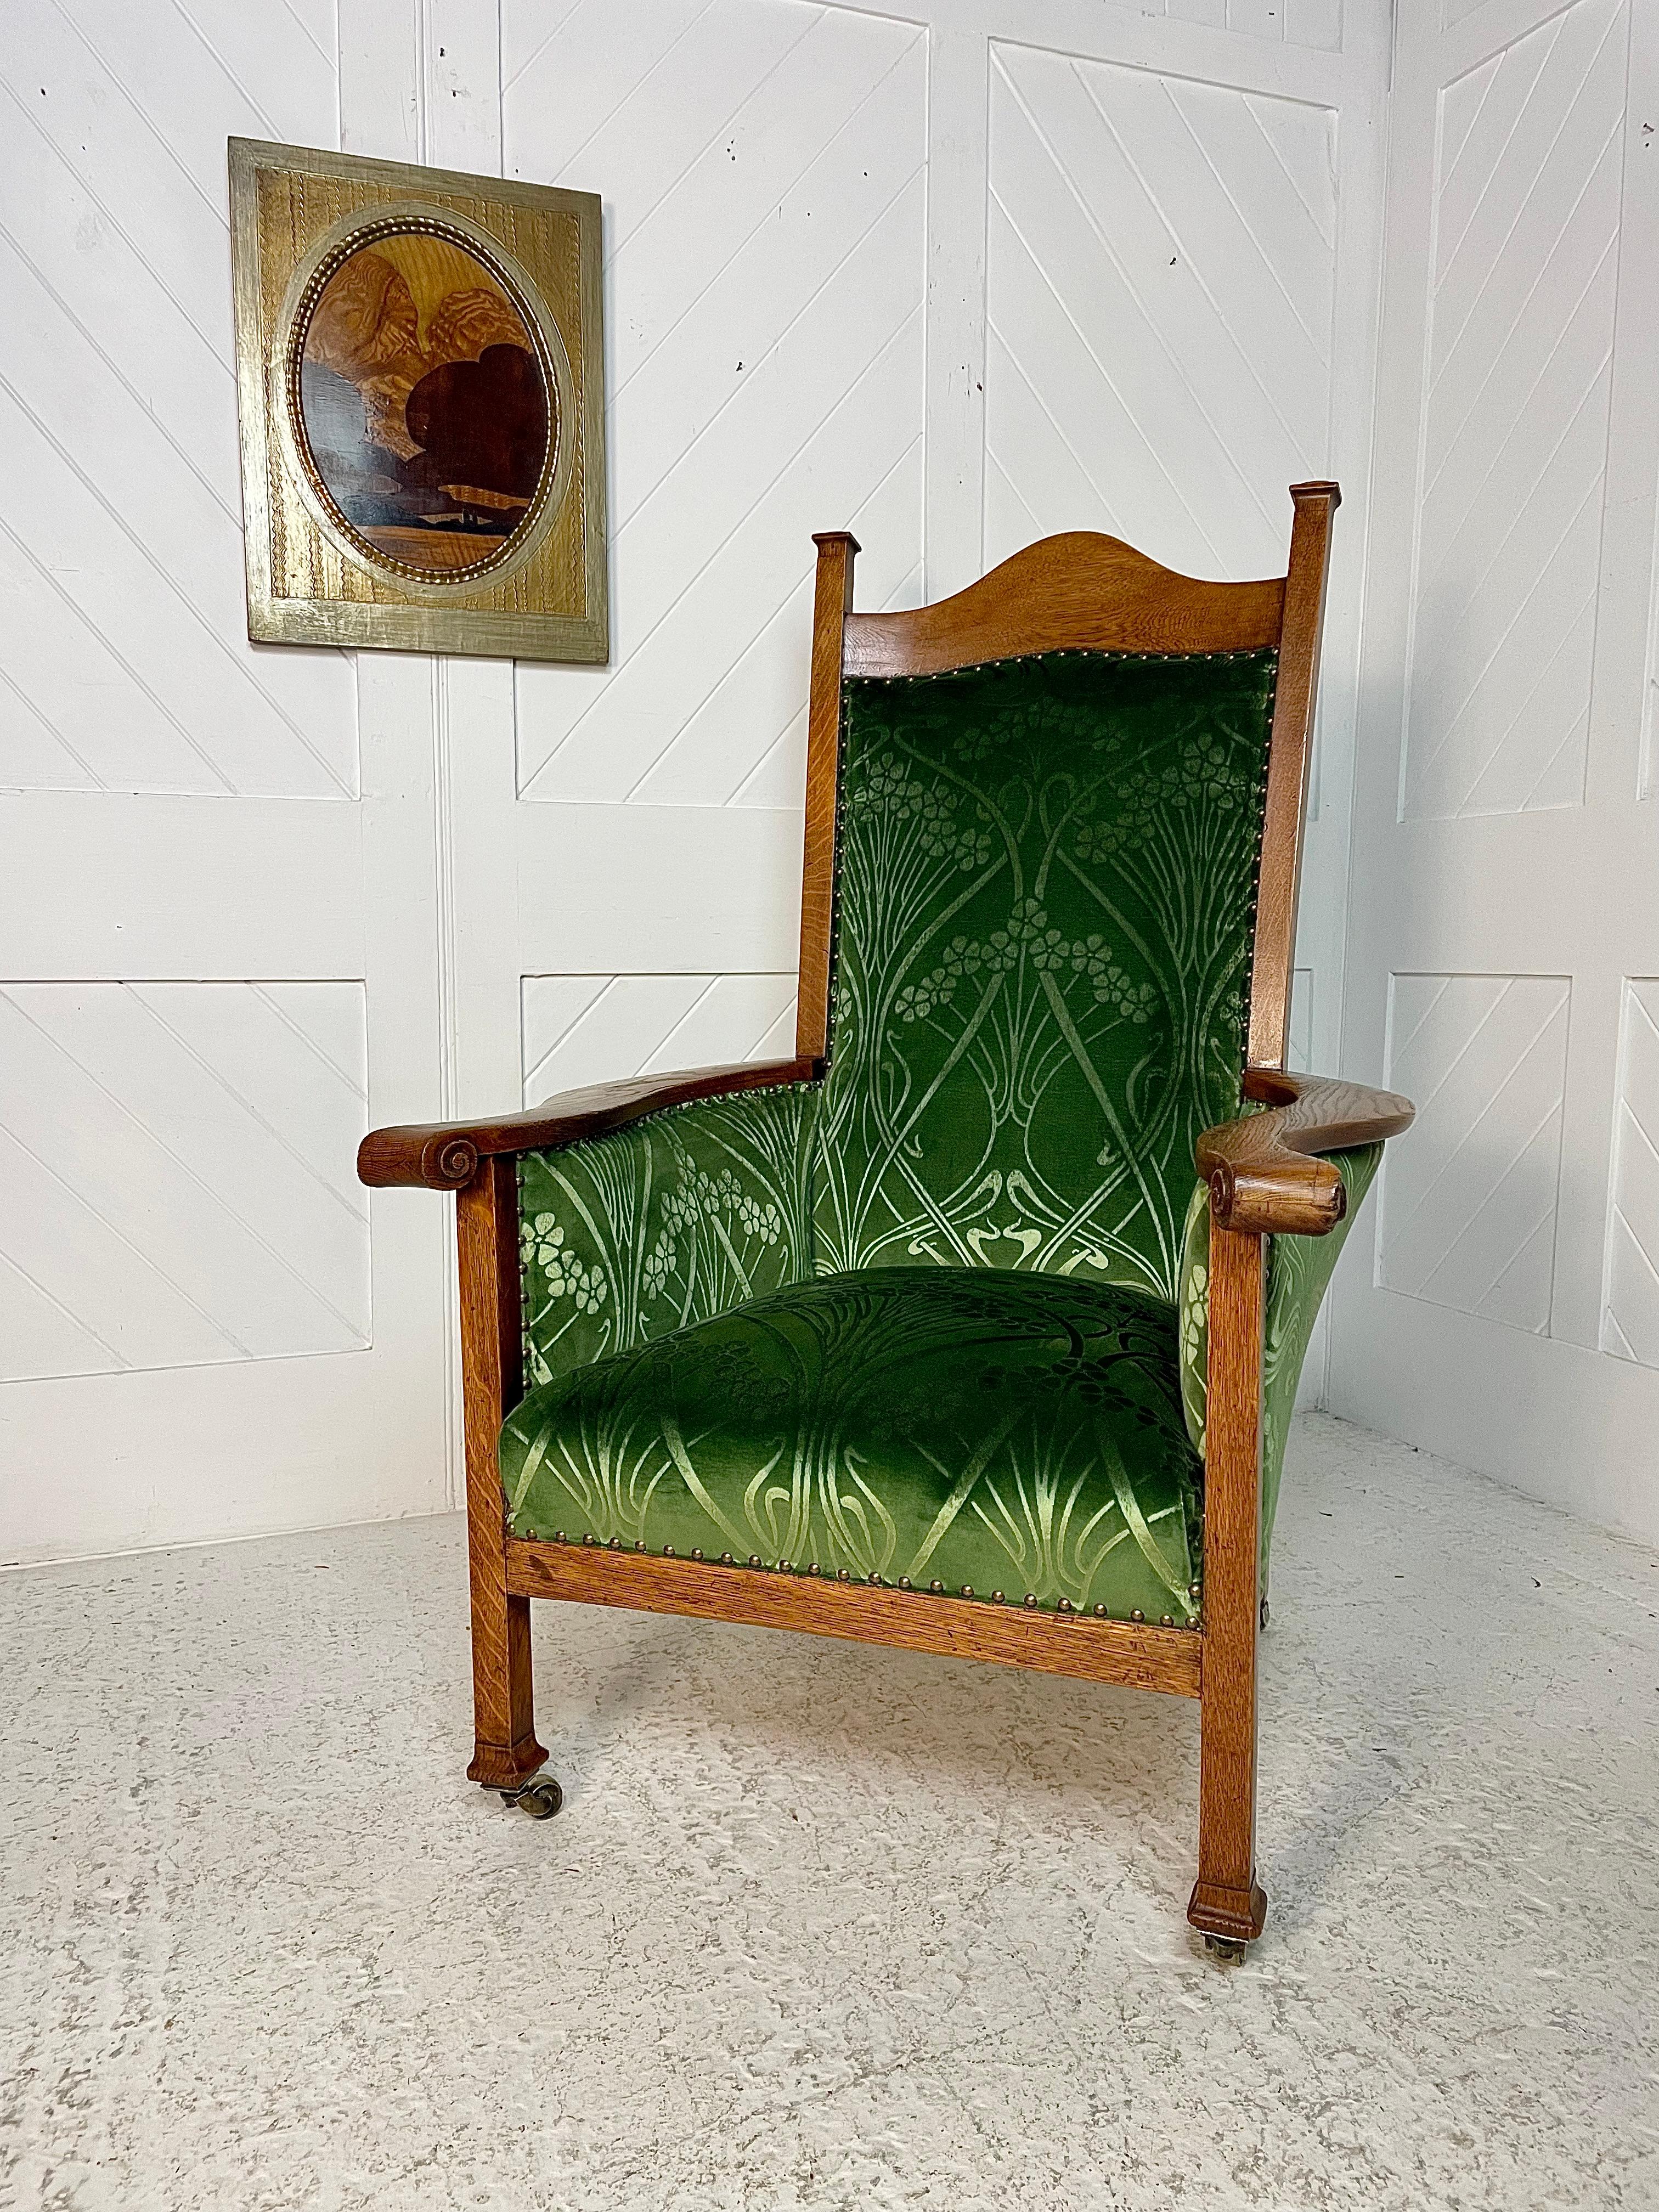 A beautiful generous Arts and Crafts armchair with sweeping arms , arching top rail and pad feet raised on brass castors. This chair has a presence and proportion that is difficult to capture on a camara its a statement piece designed in every way